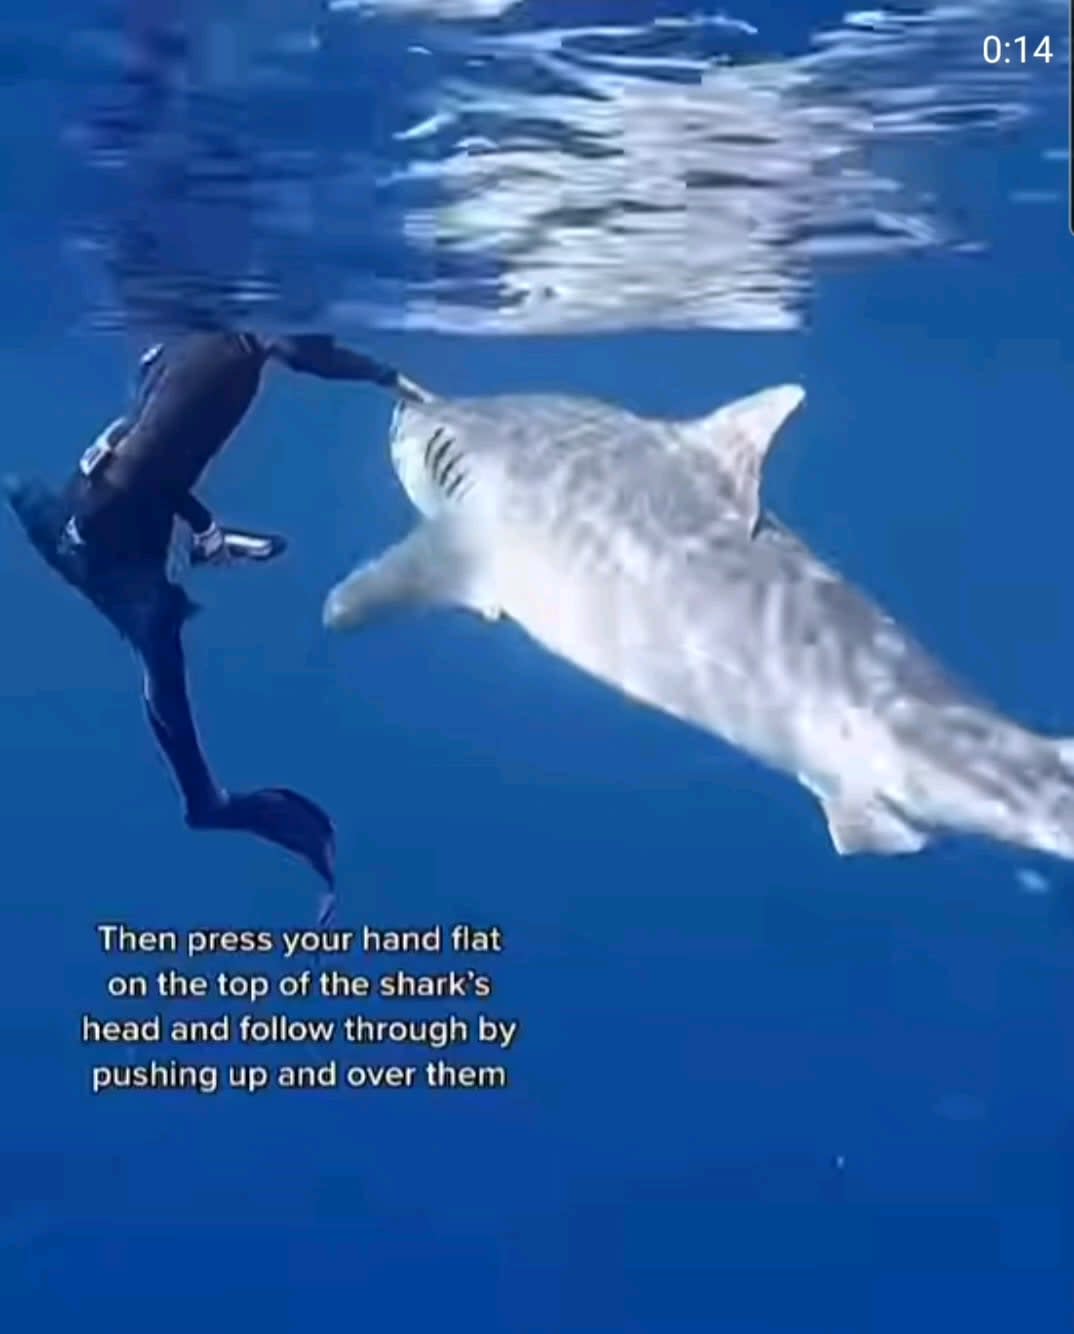 Whenever you find yourself in the water with a Tiger Shark, here's a great skill to learn.